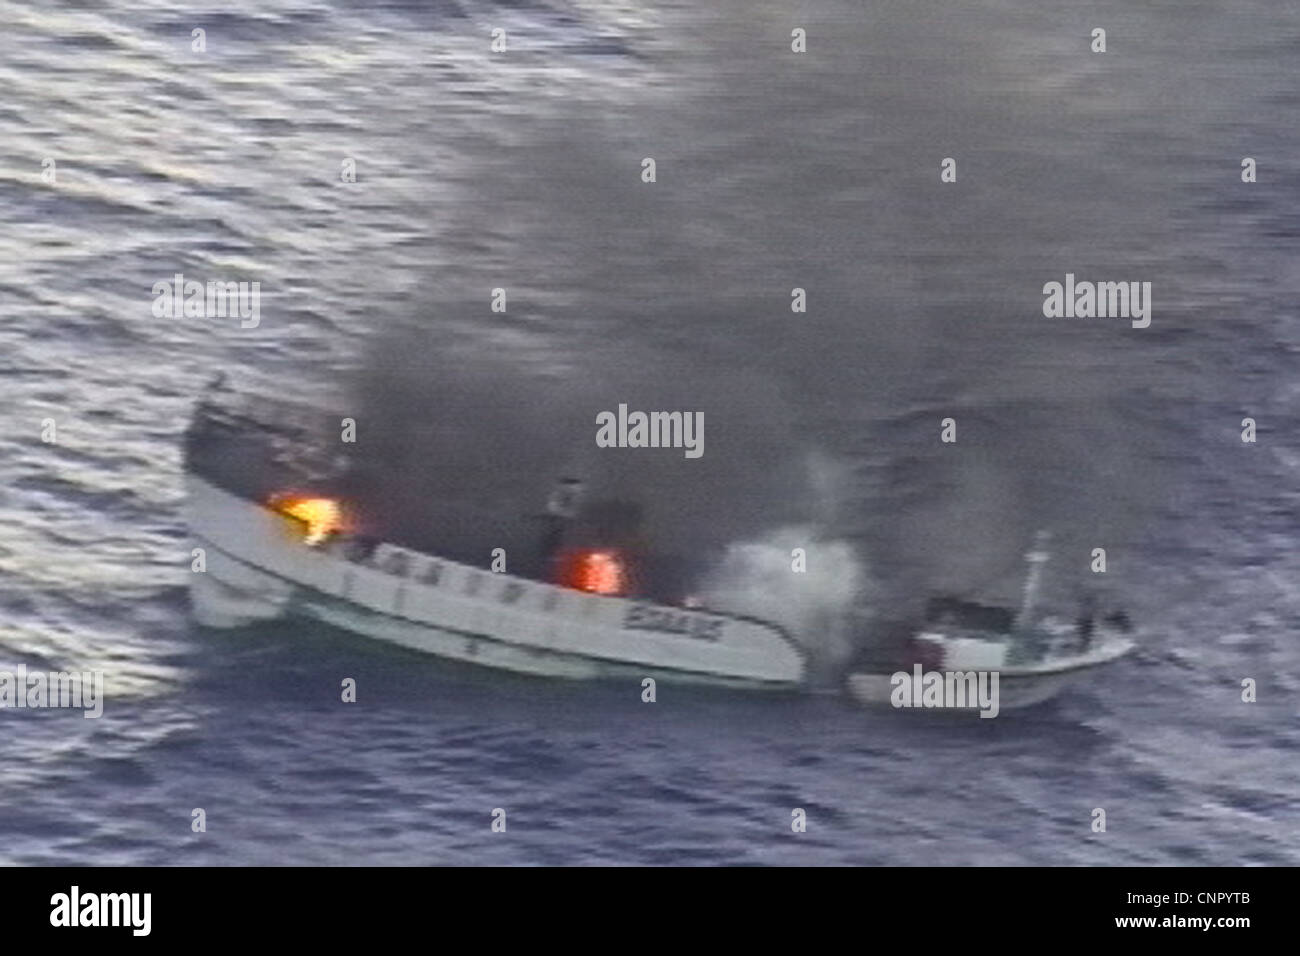 A fire burns uncontrollably aboard the Taiwanese fishing vessel Shin Maan Chun Saturday in the Pacific Ocean. The fire forced the crew of nine to abandon ship and through a coordinated effort between the U.S. 7th Fleet and U.S. Coast Guard District 14, all of the fishermen were safely rescued and brought aboard the Marshallese-flagged bulk carrier Semirio. Stock Photo